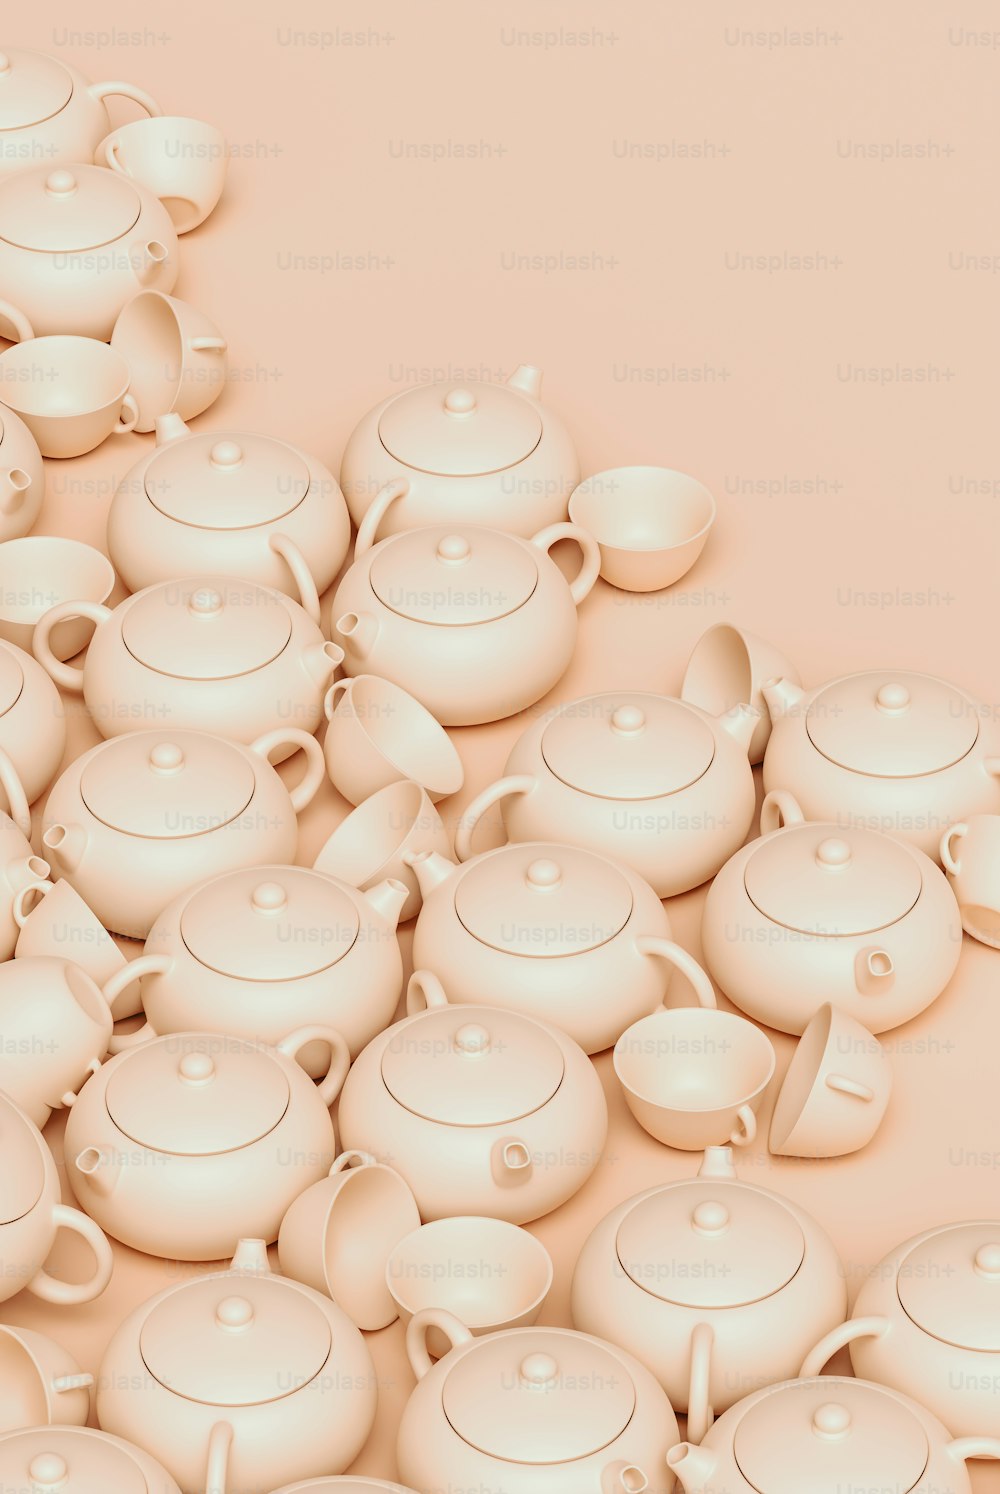 a pile of white teapots sitting on top of each other